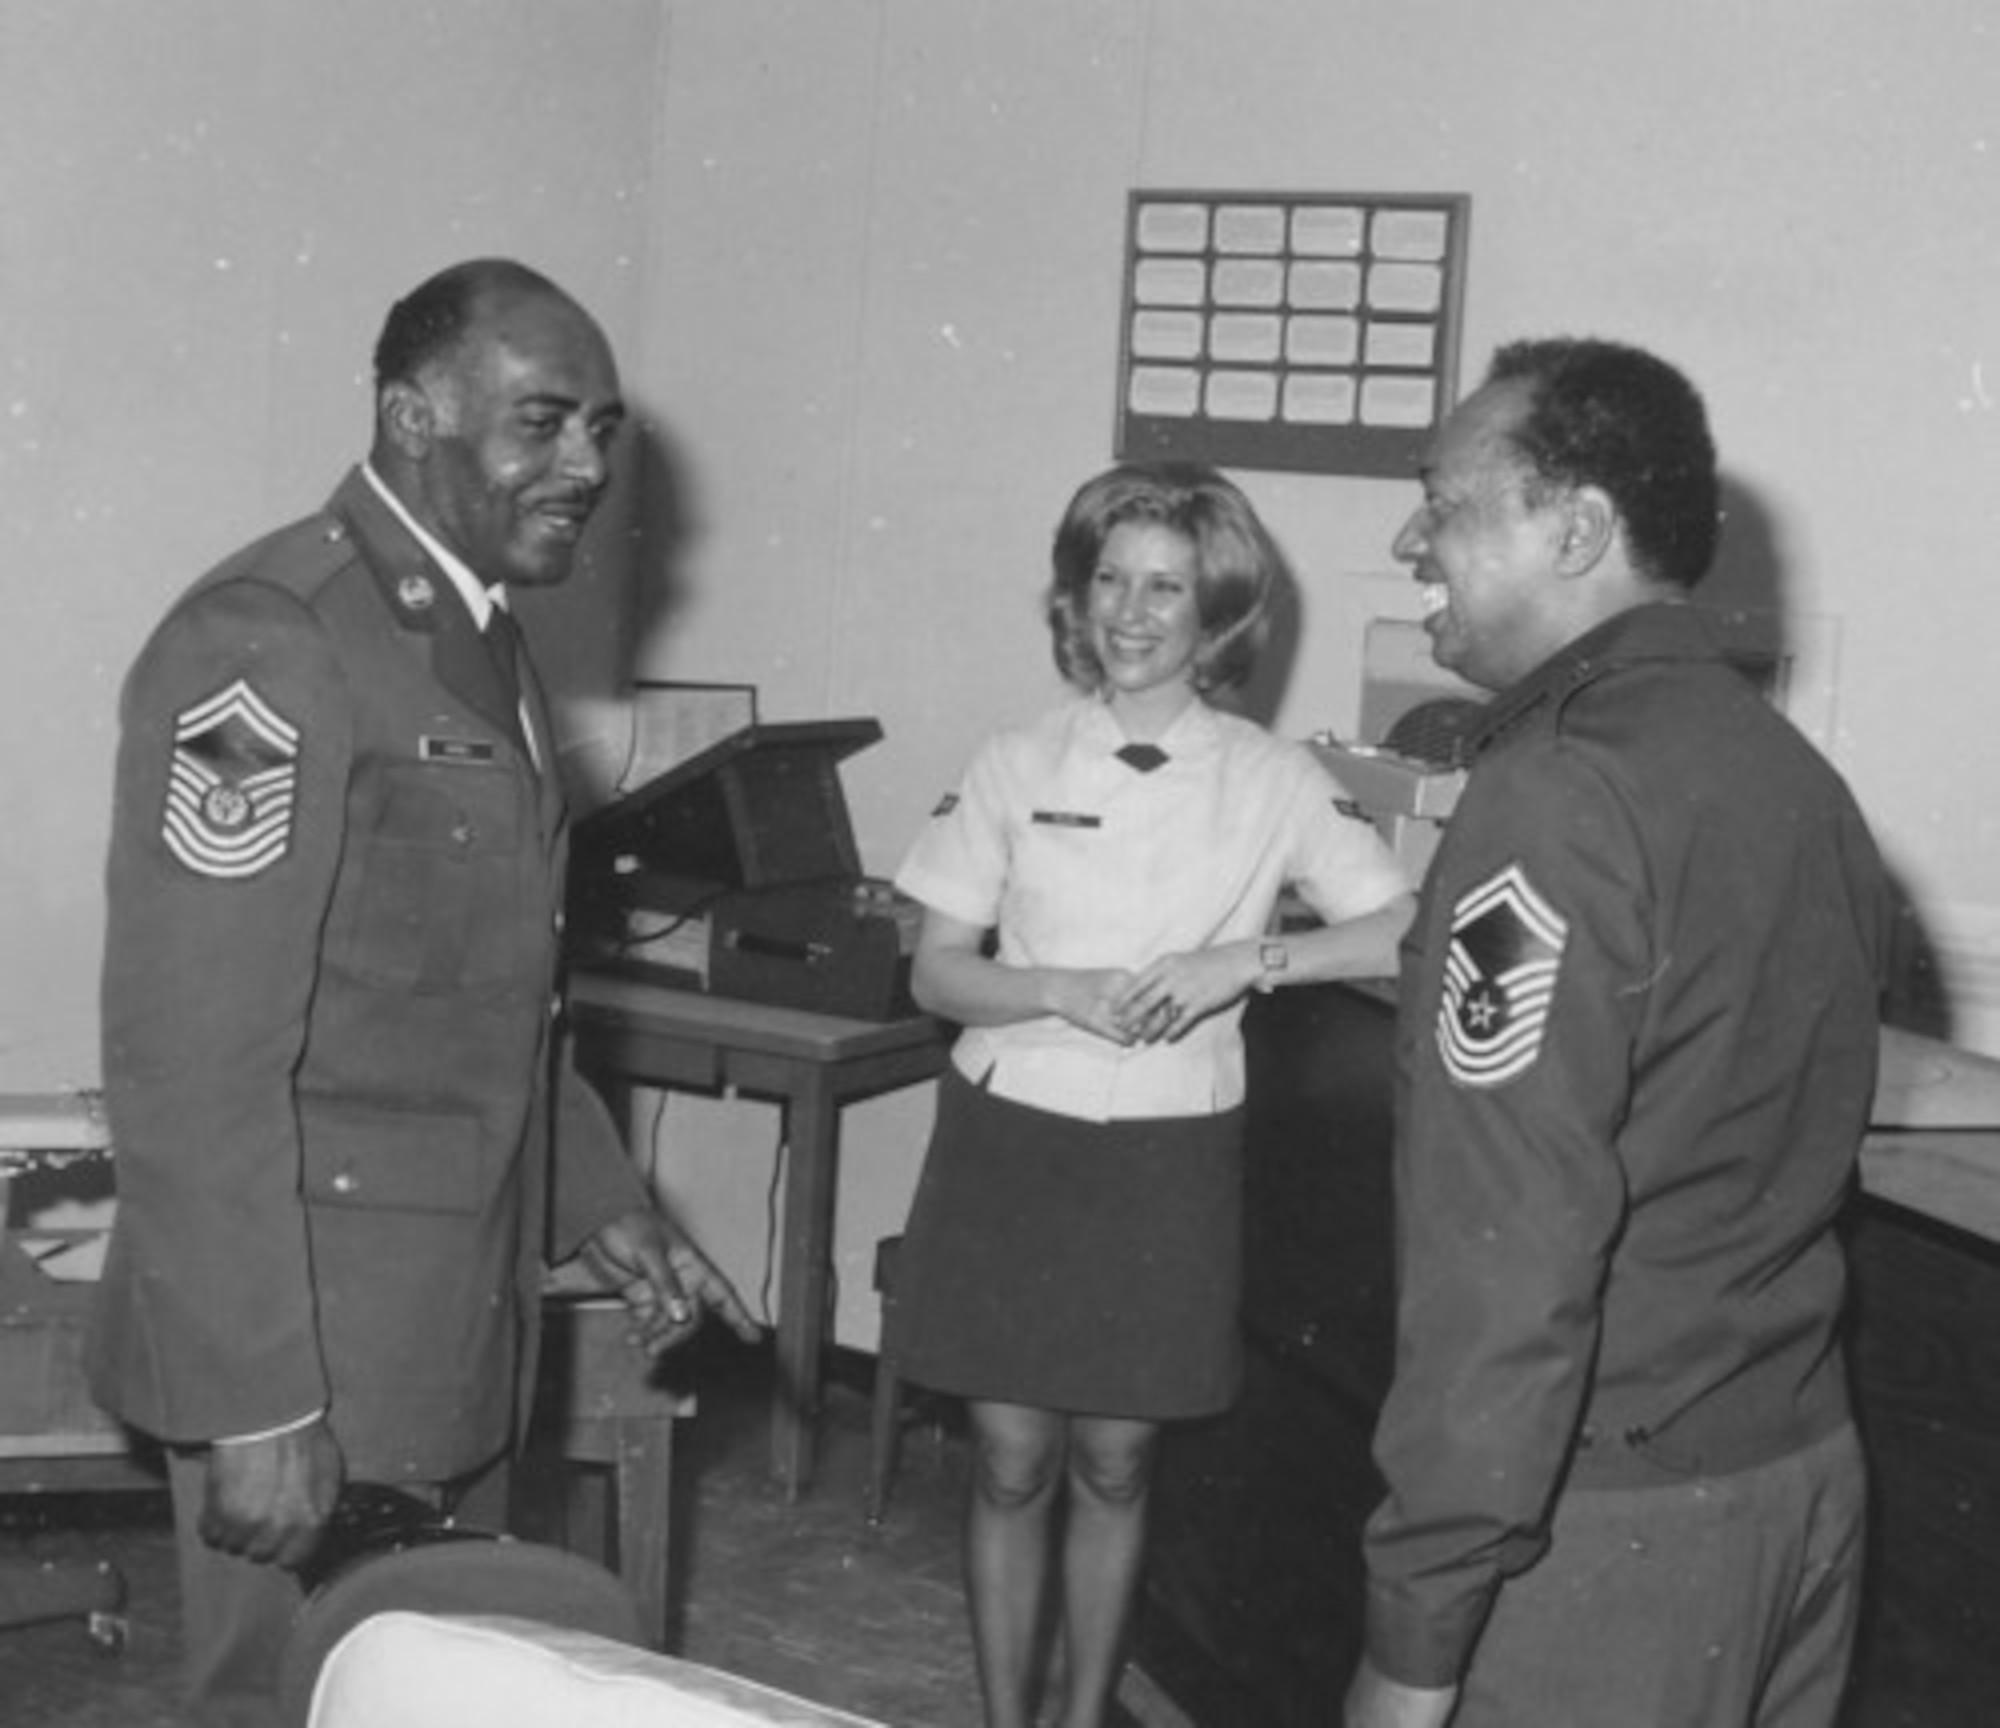 Chief Master Sgt. Thomas N. Barnes visits Turkey in 1976 with Chief Master Sgt. J.M. Huckless. (Photo courtesy of the Tinker History Office)